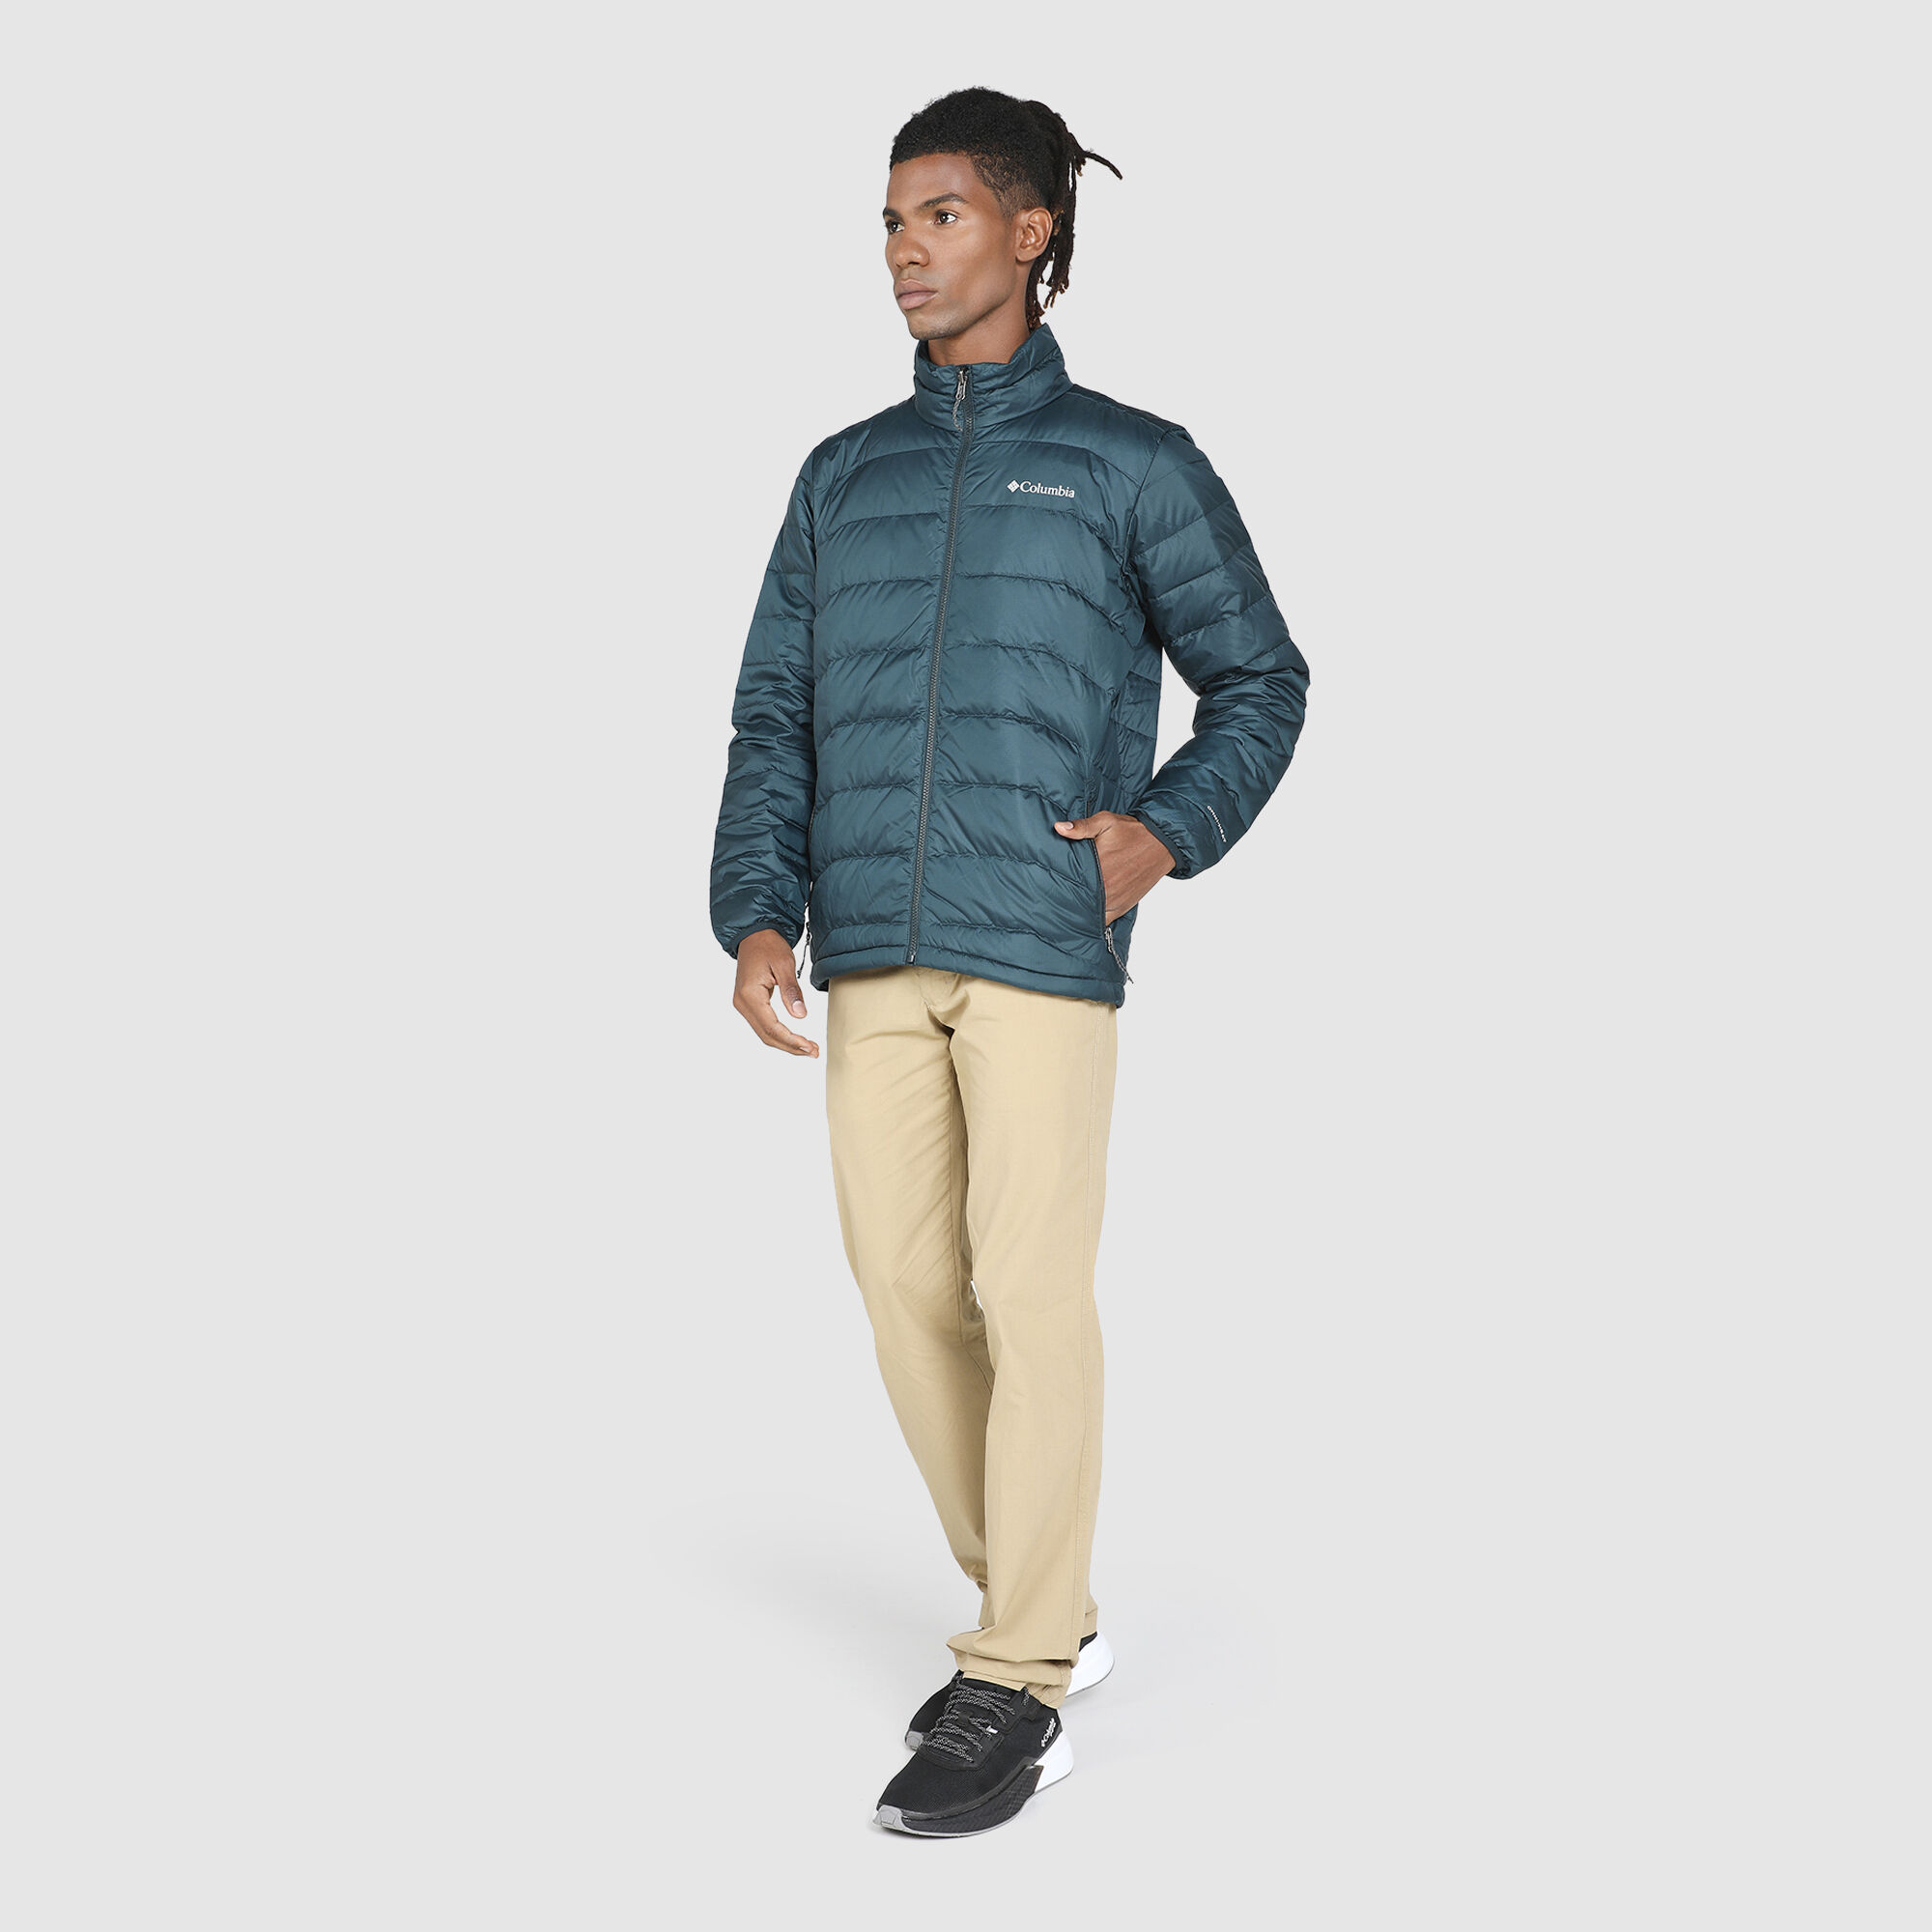 COLUMBIA Men's Labyrinth Loop Jacket - Eastern Mountain Sports